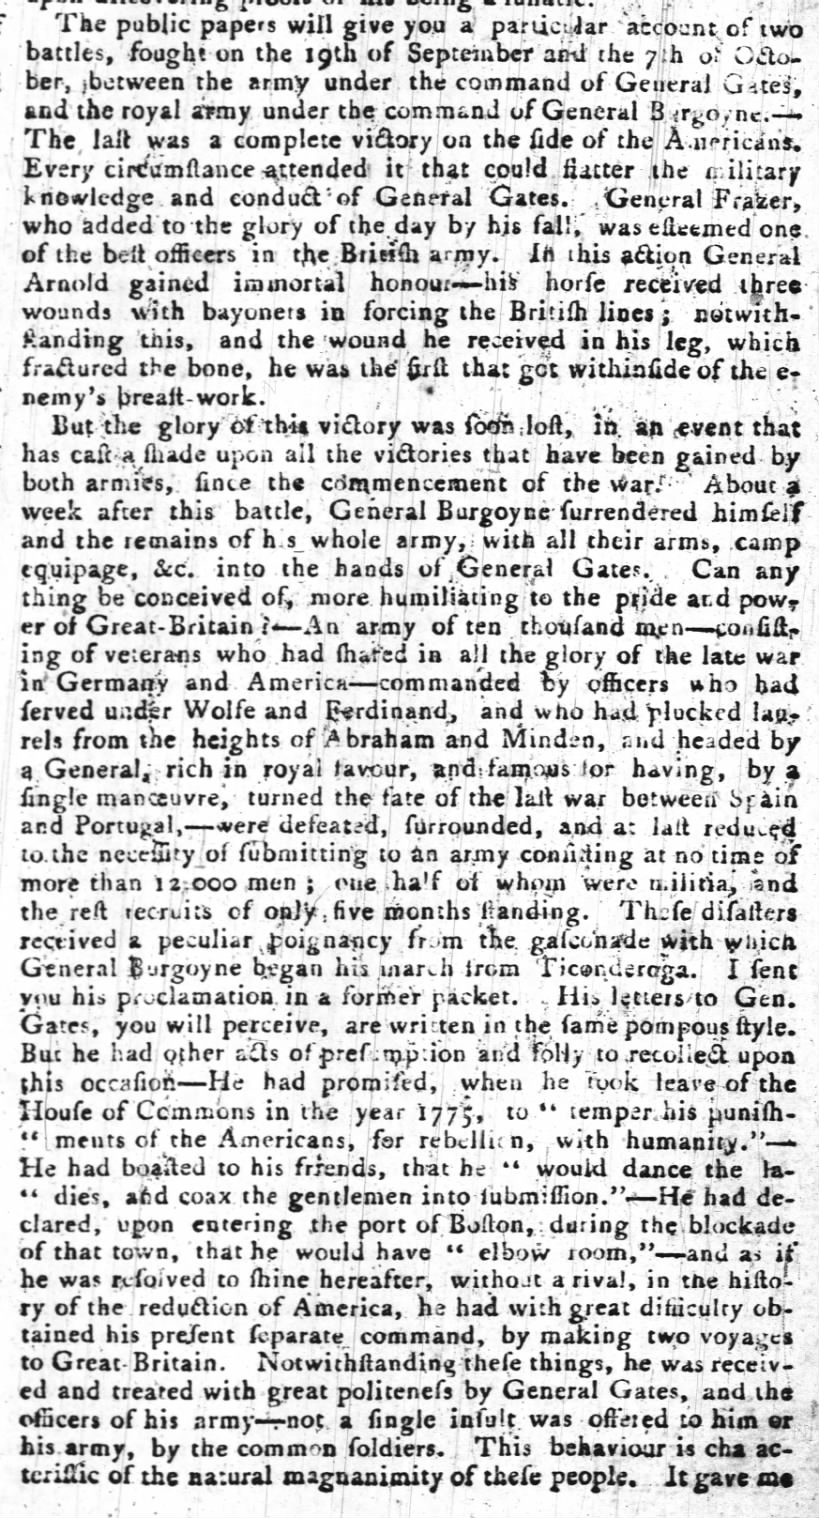 A Frenchman living in America writes a letter with his views on the Battles of Saratoga